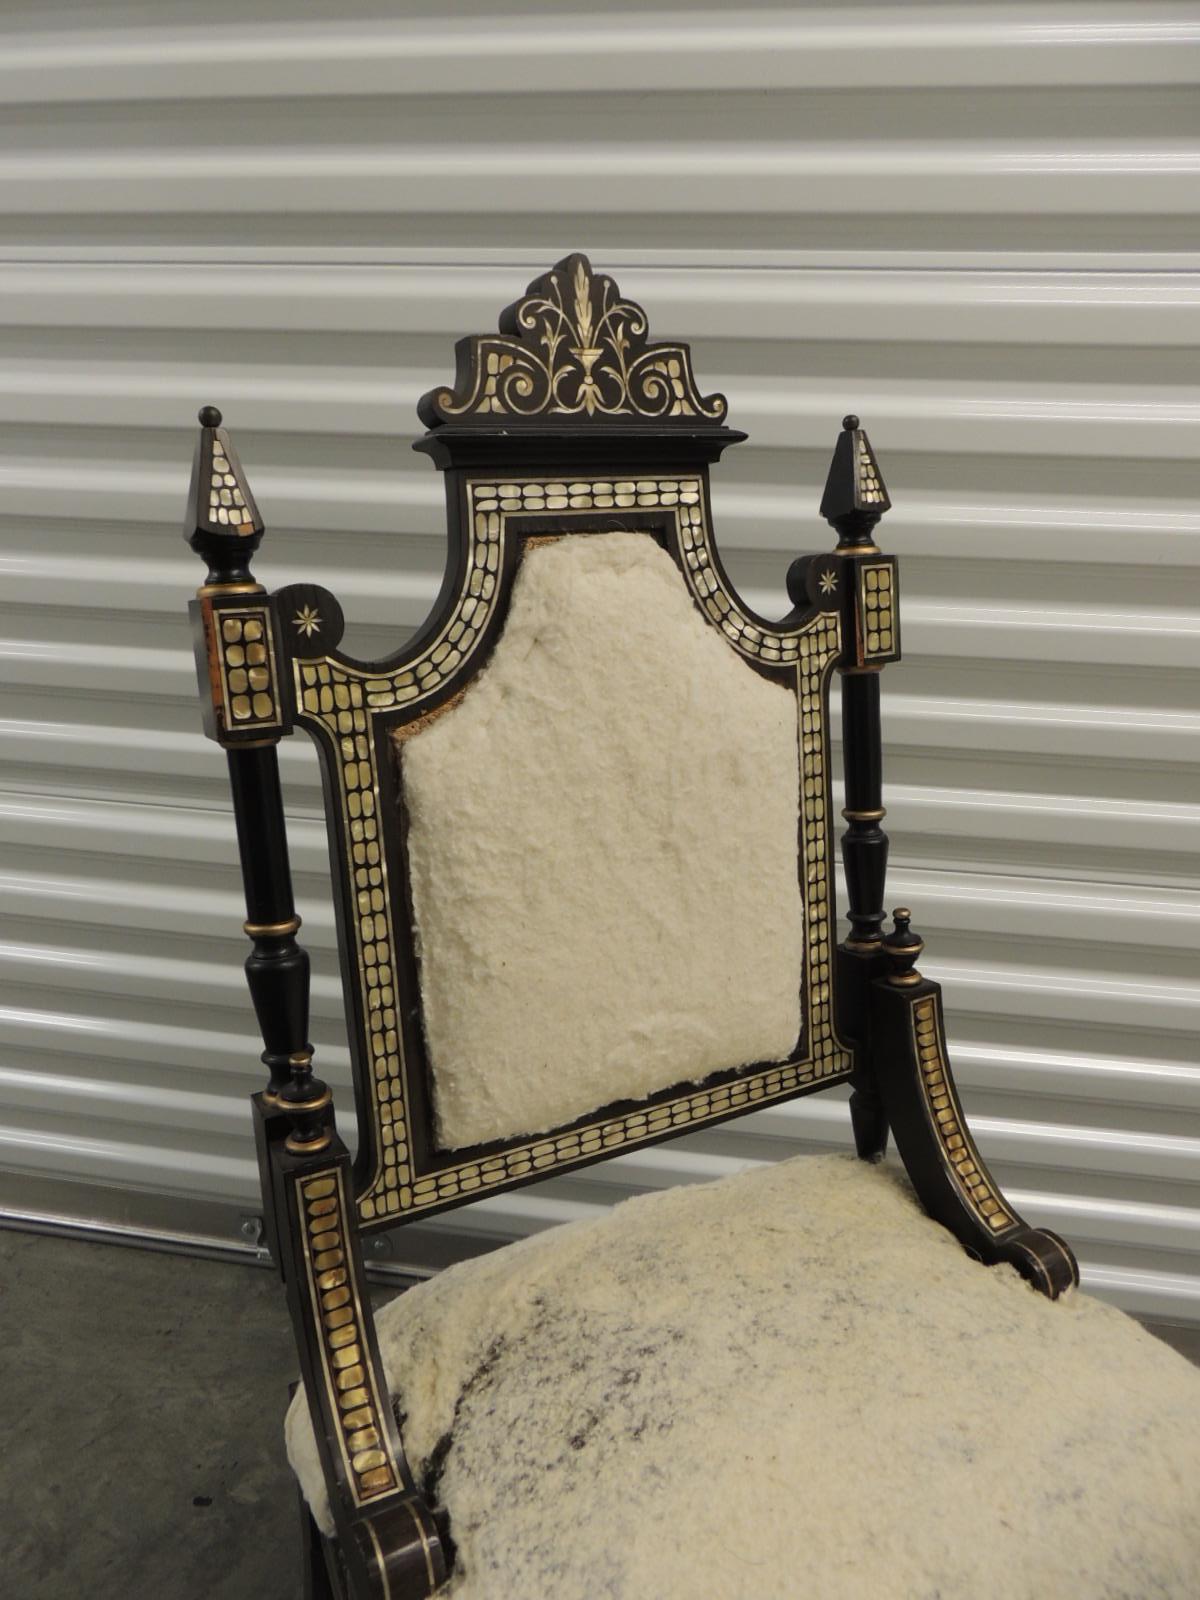 Vintage Moroccan mother-of-pearl inlaid frame and ebonized wood.
One-of-the-kind slipper chair, with original wool and horsehair stuff on back and seat.
Turned wood legs with gold leaf painted details.
Very sturdy side chair needs a new